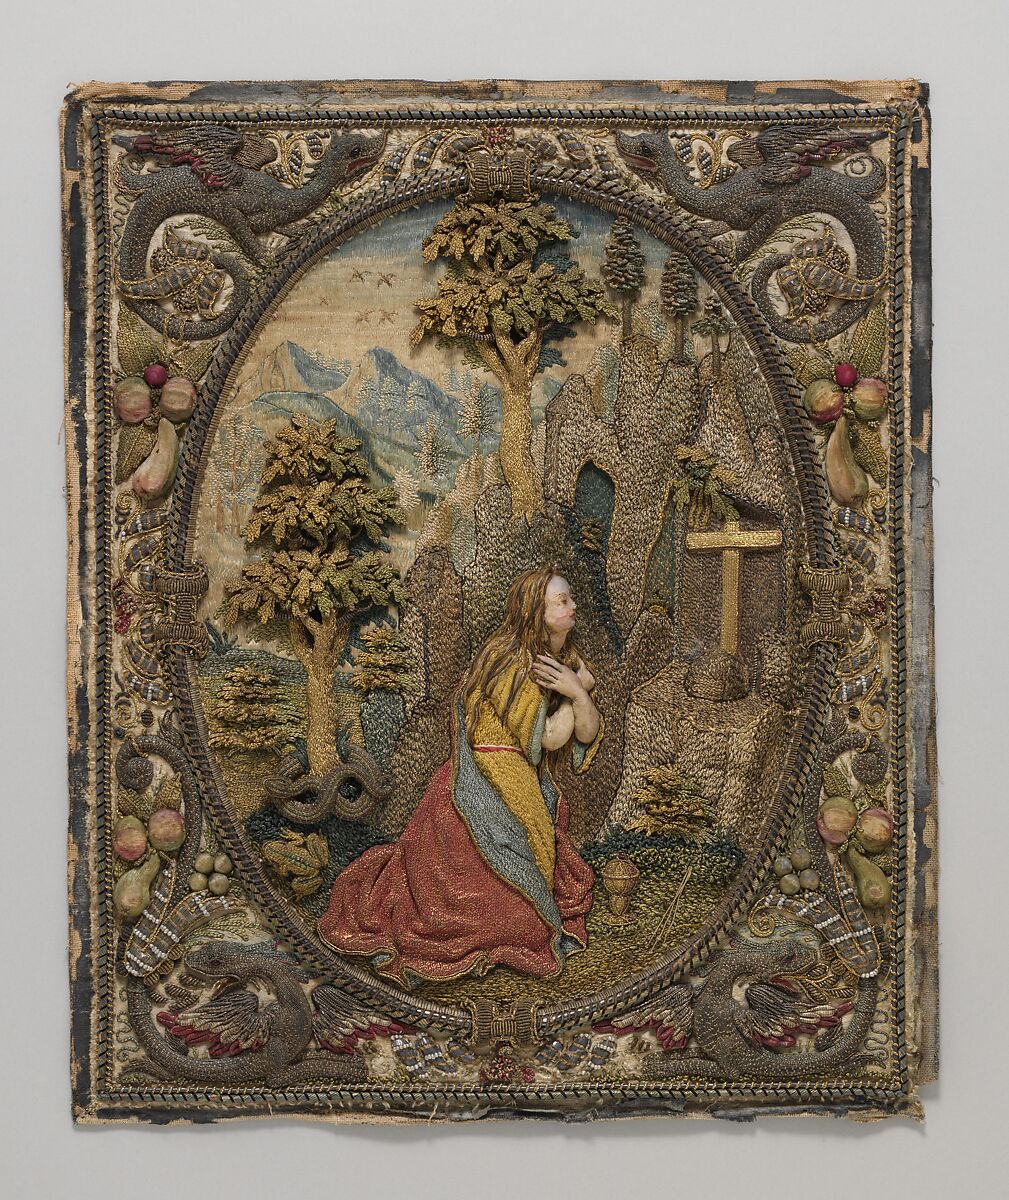 Embroidered picture, Silk, metal thread and pearls on silk, Flemish 